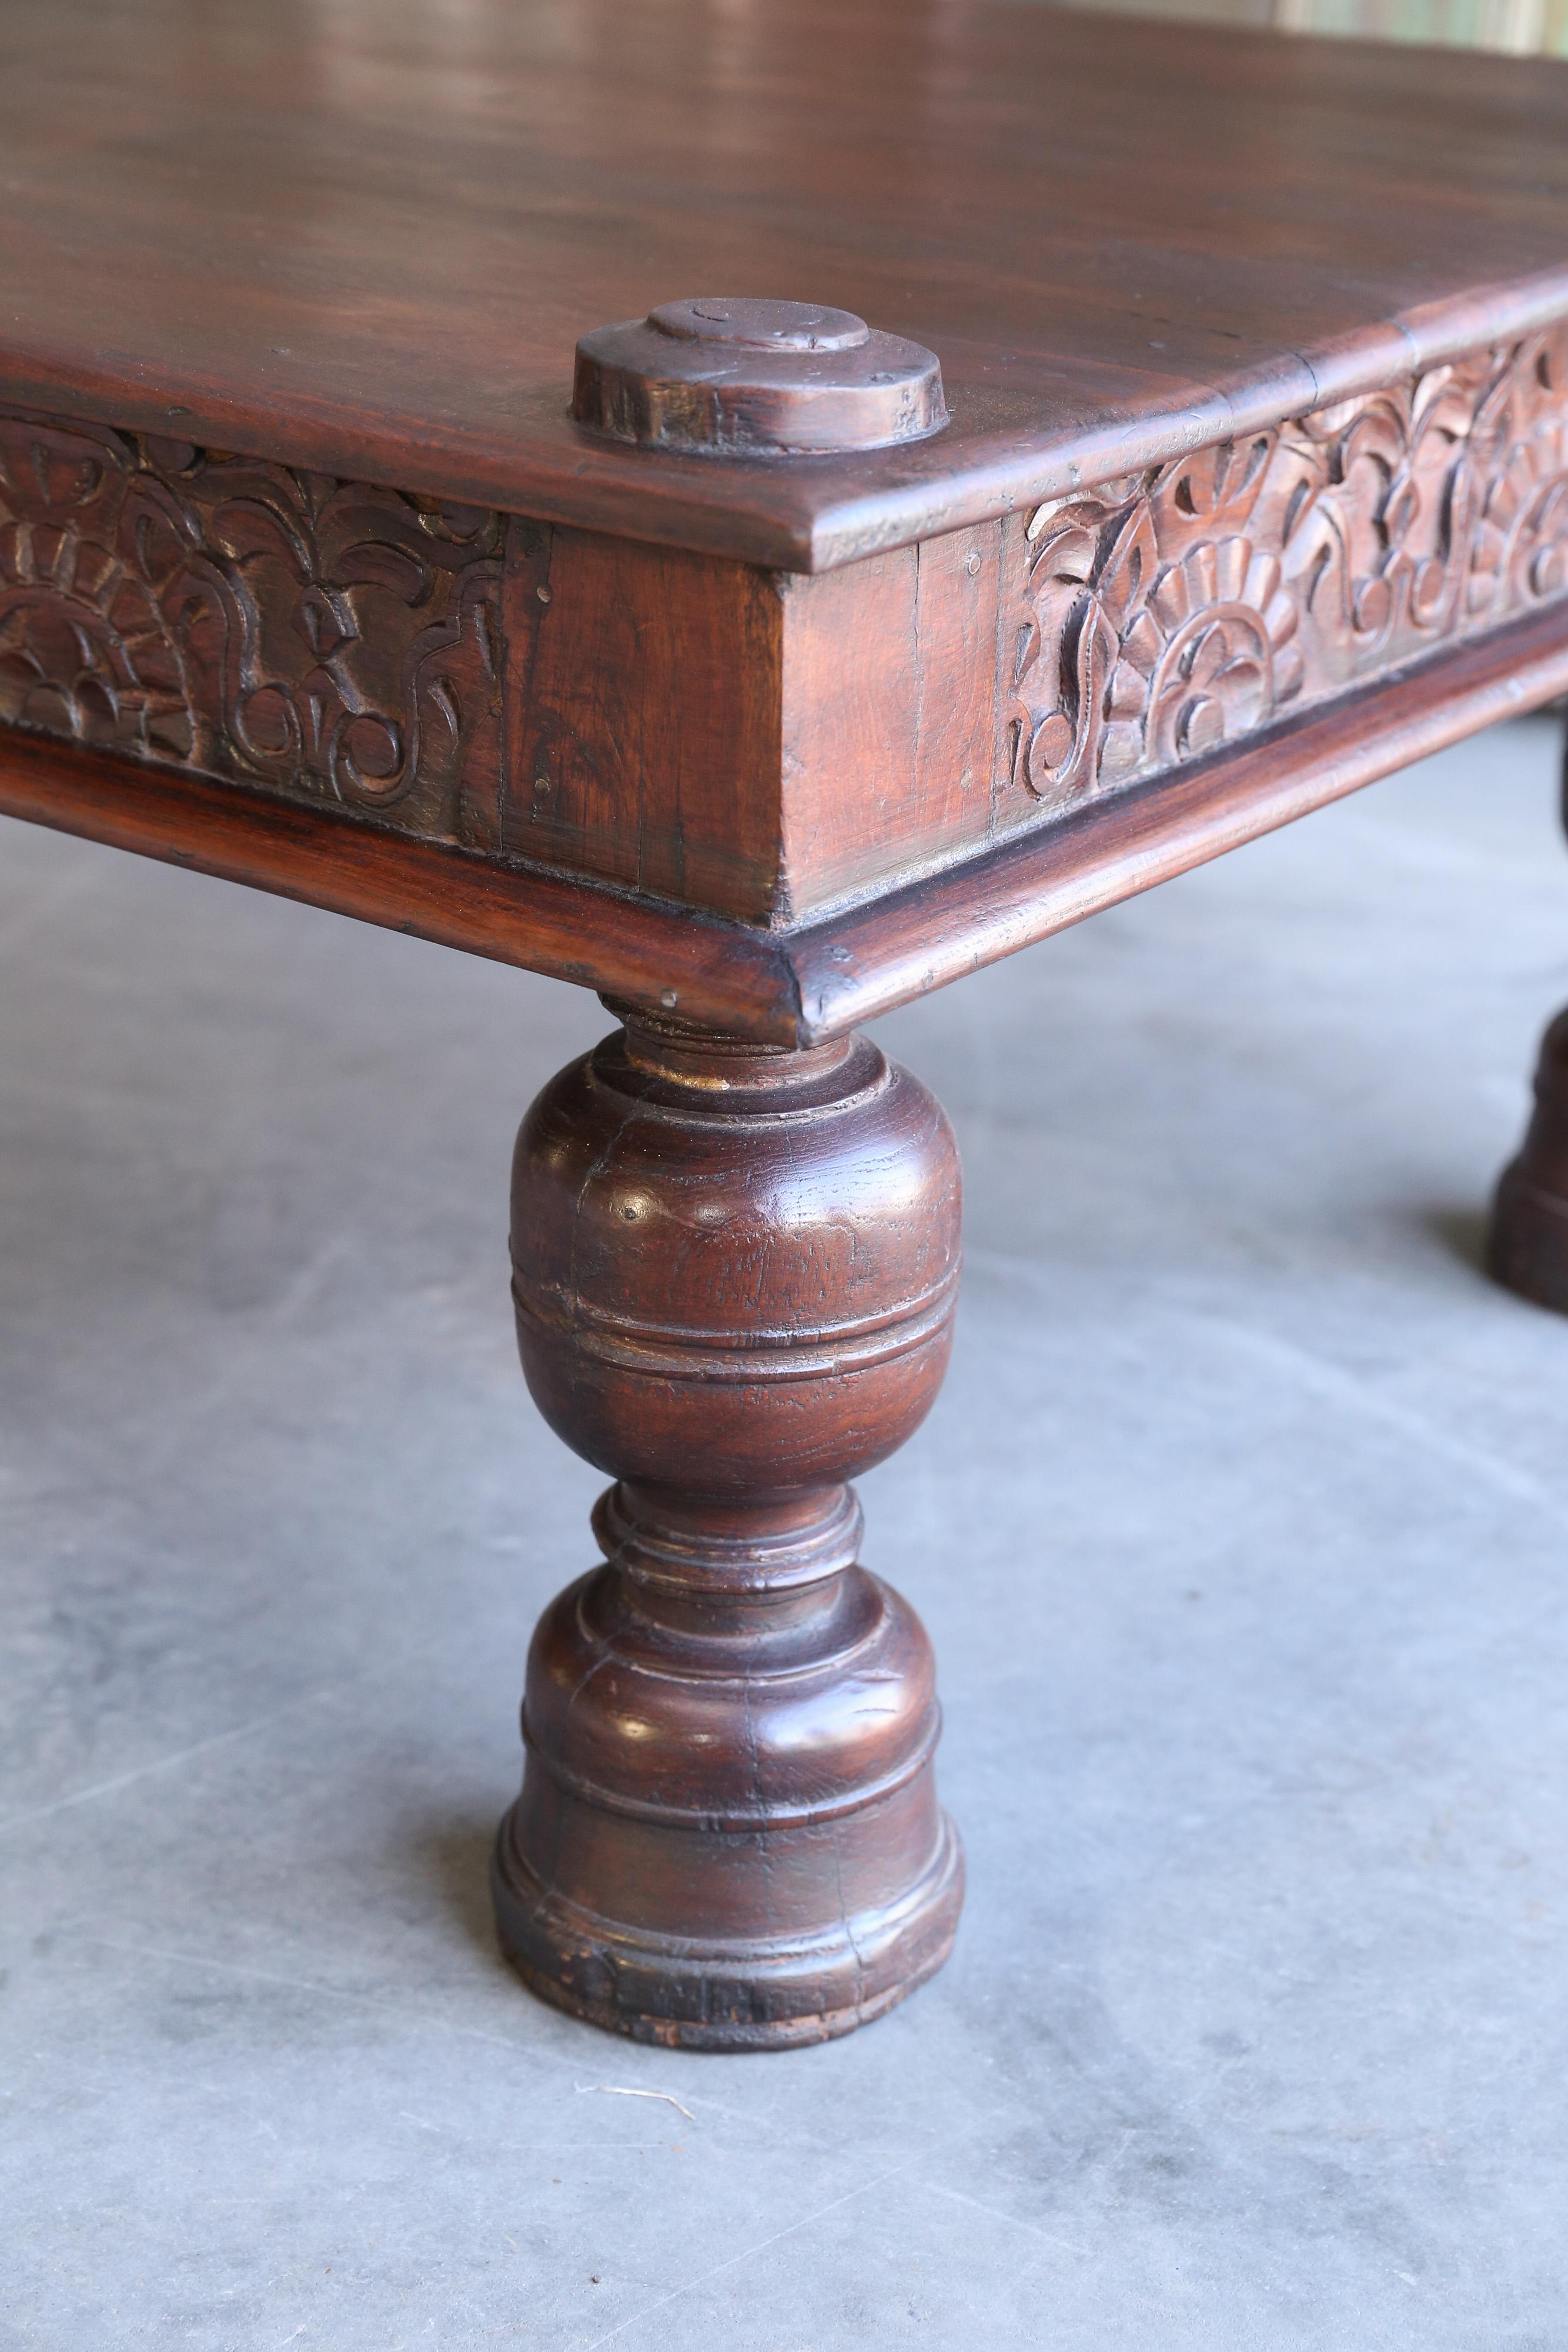 Made per customer design this is a heavily made solid teak wood coffee table. The legs and apron are finely shaped and carved. This is a typical example of the best in Anglo Raj furniture. It shows originality combined with day to day functional